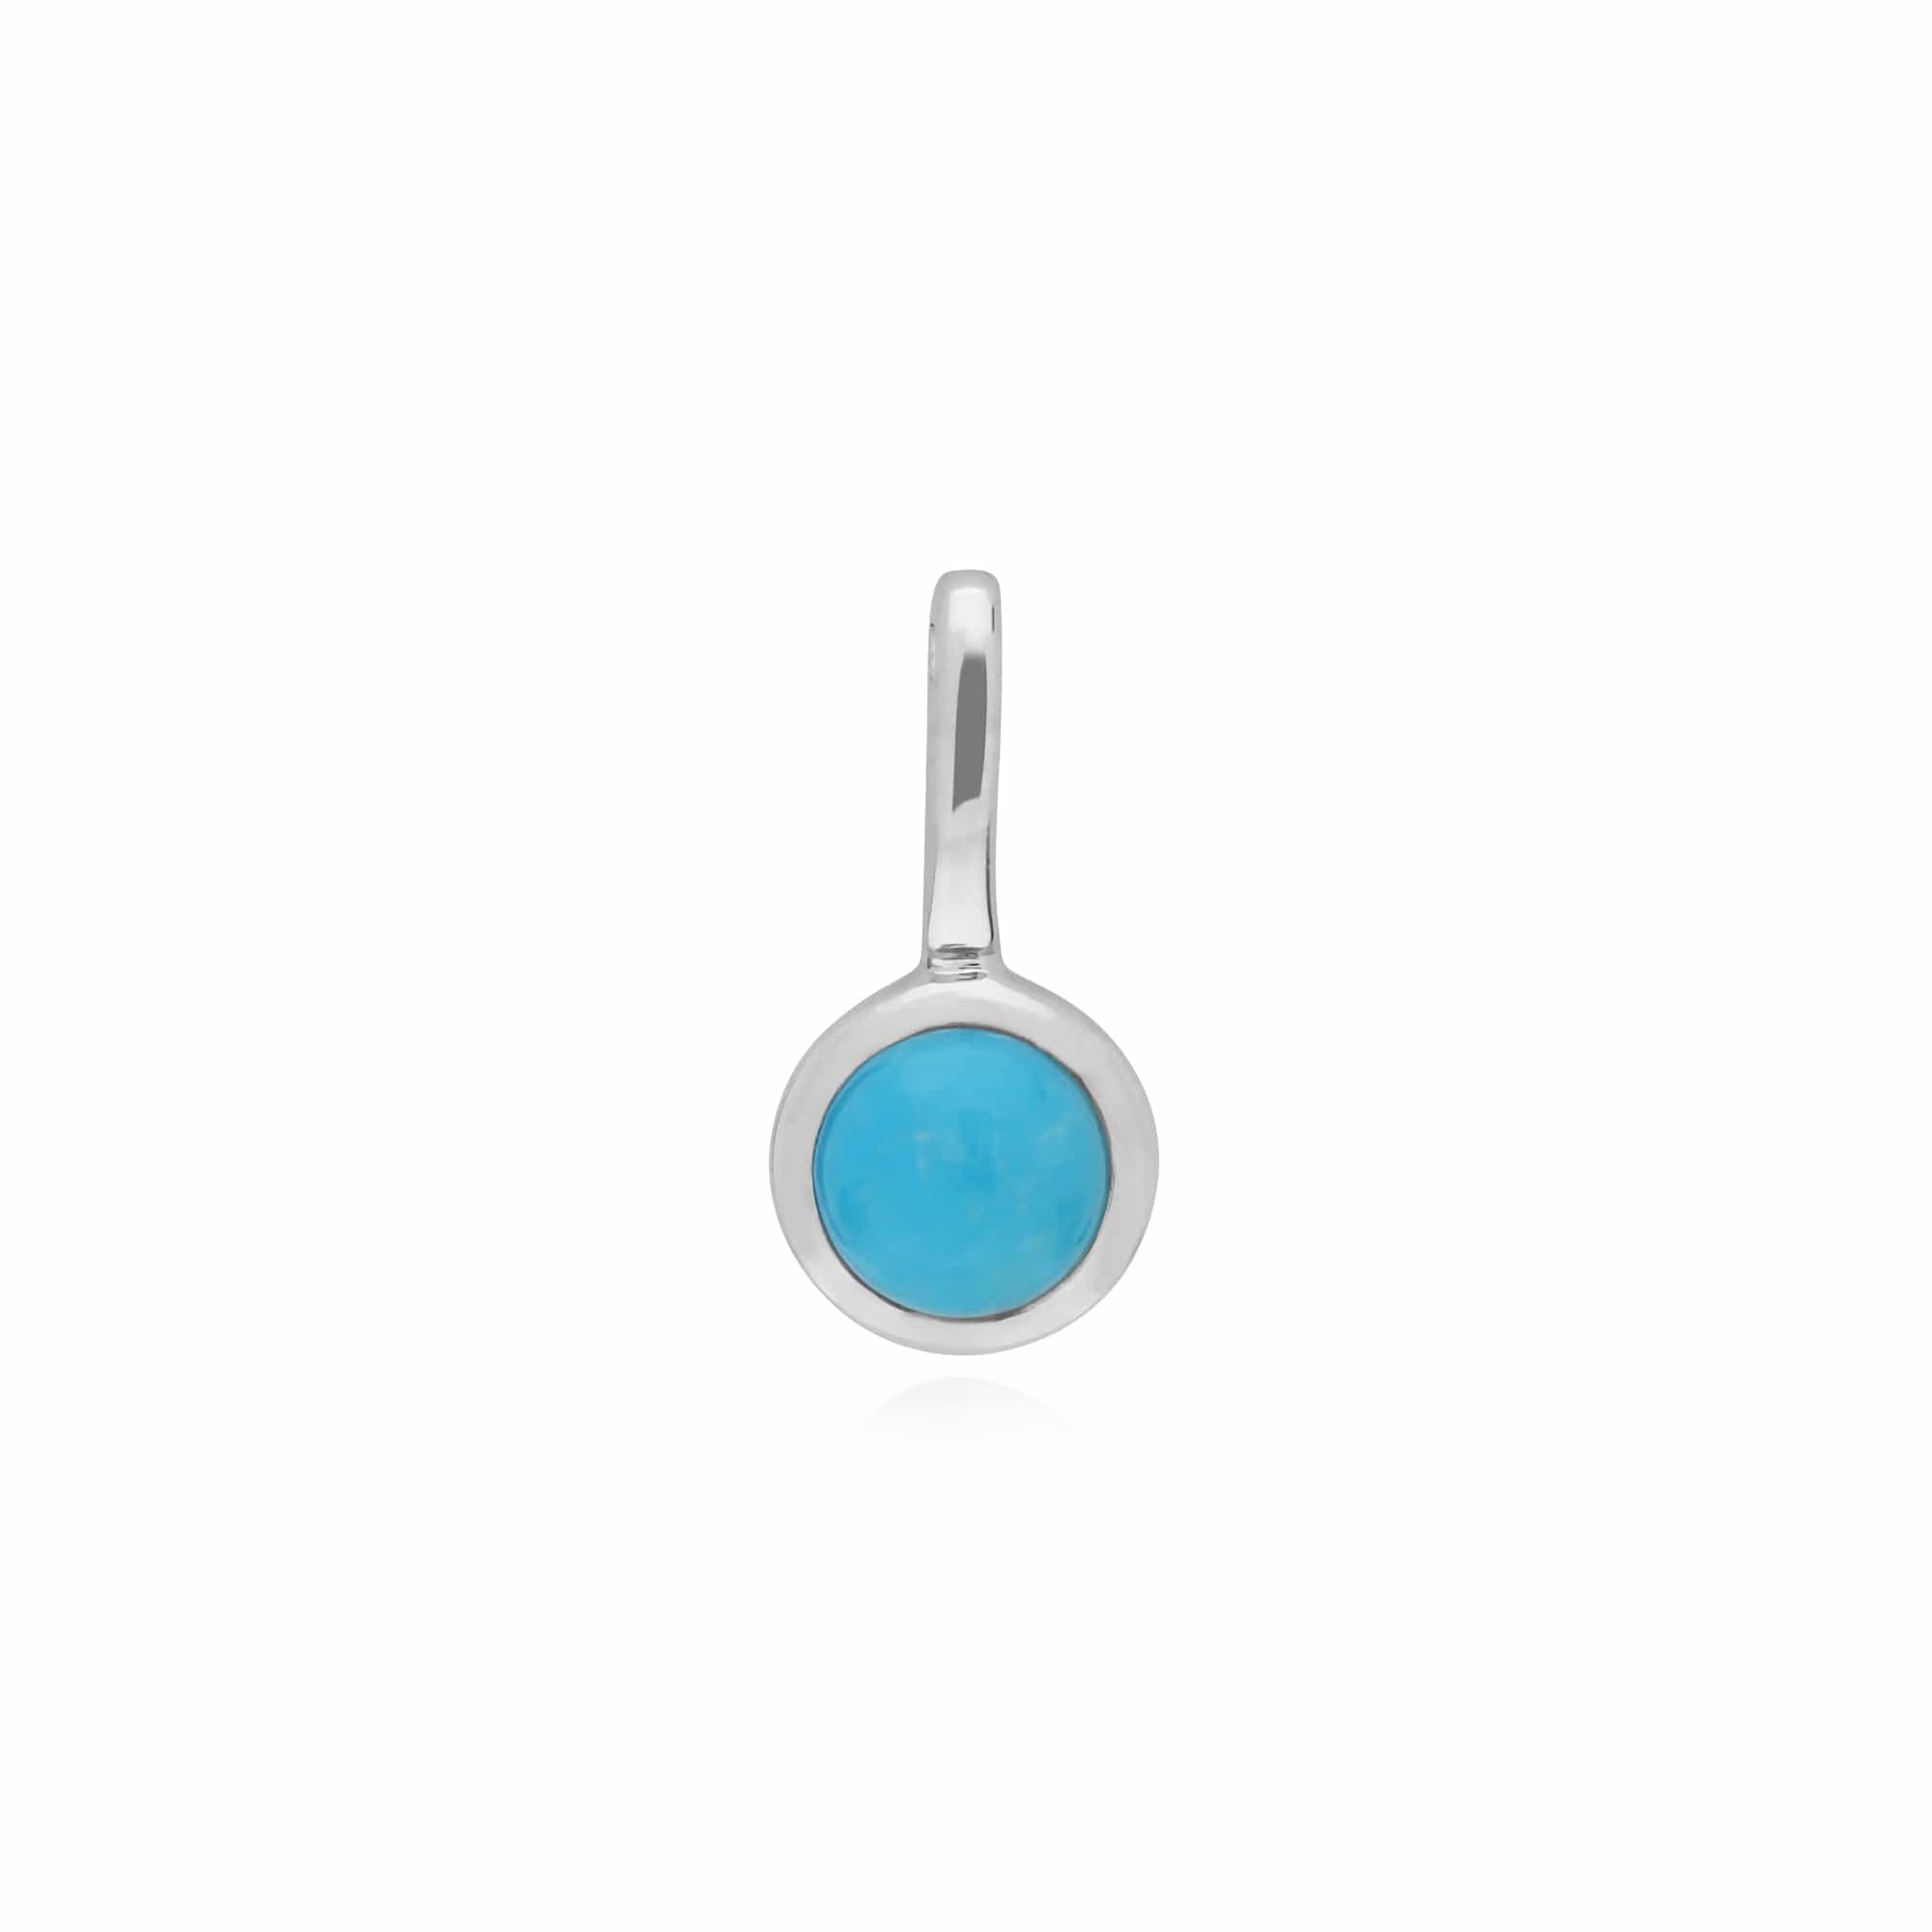 270P026001925-270P027001925 Classic Heart Lock Pendant & Turquoise Charm in 925 Sterling Silver 2